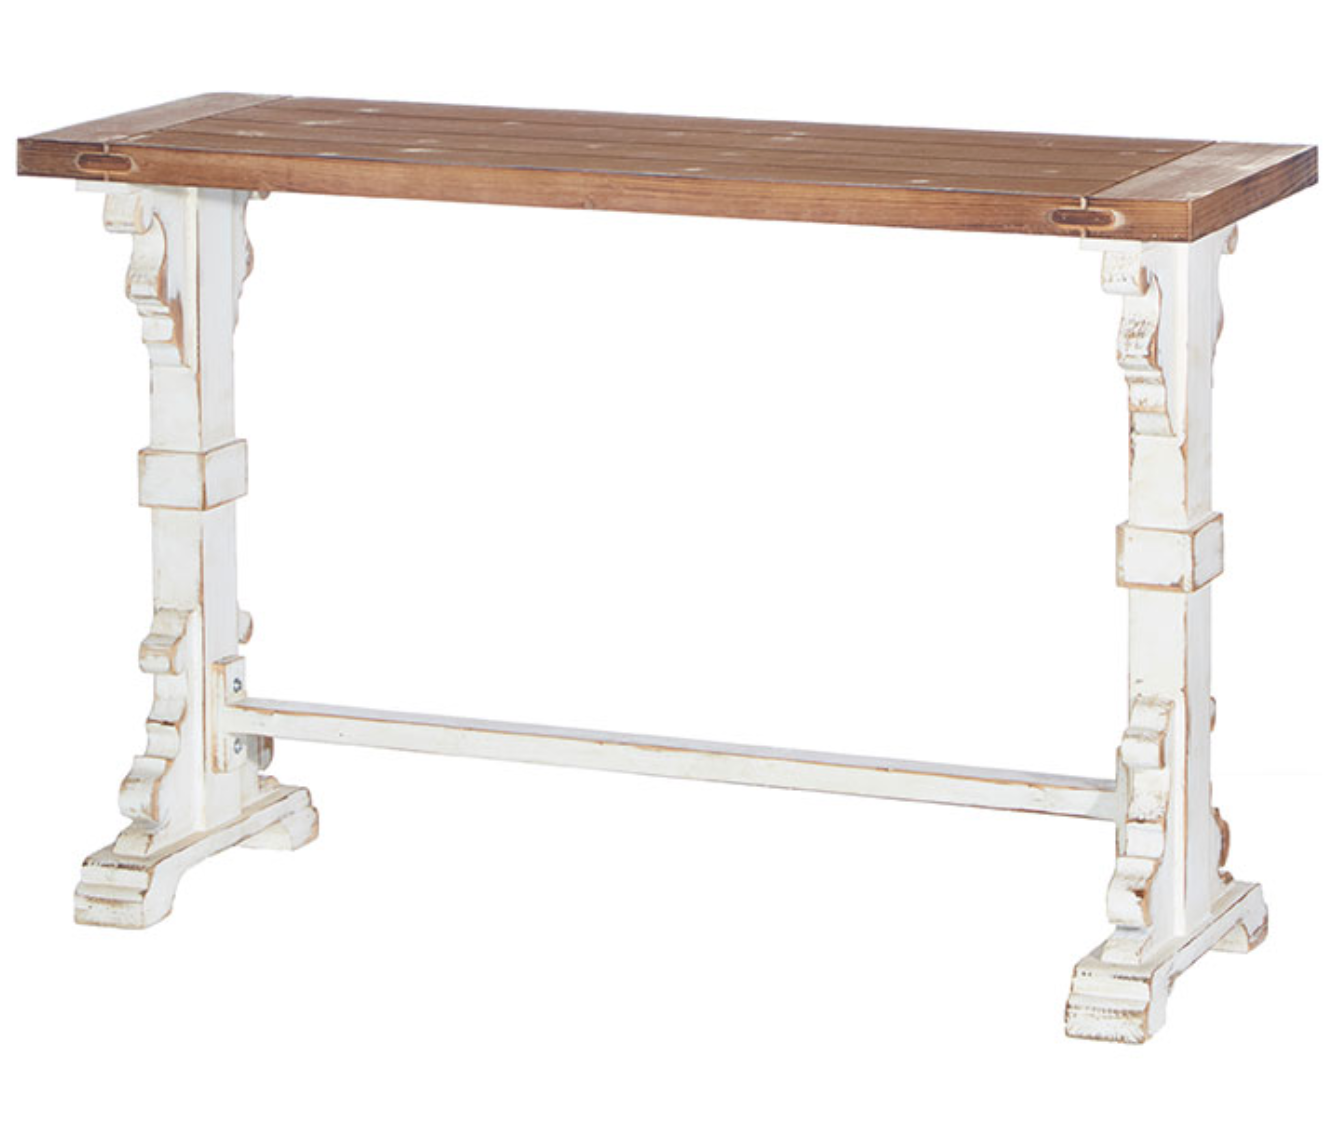 48" Distressed Console Table